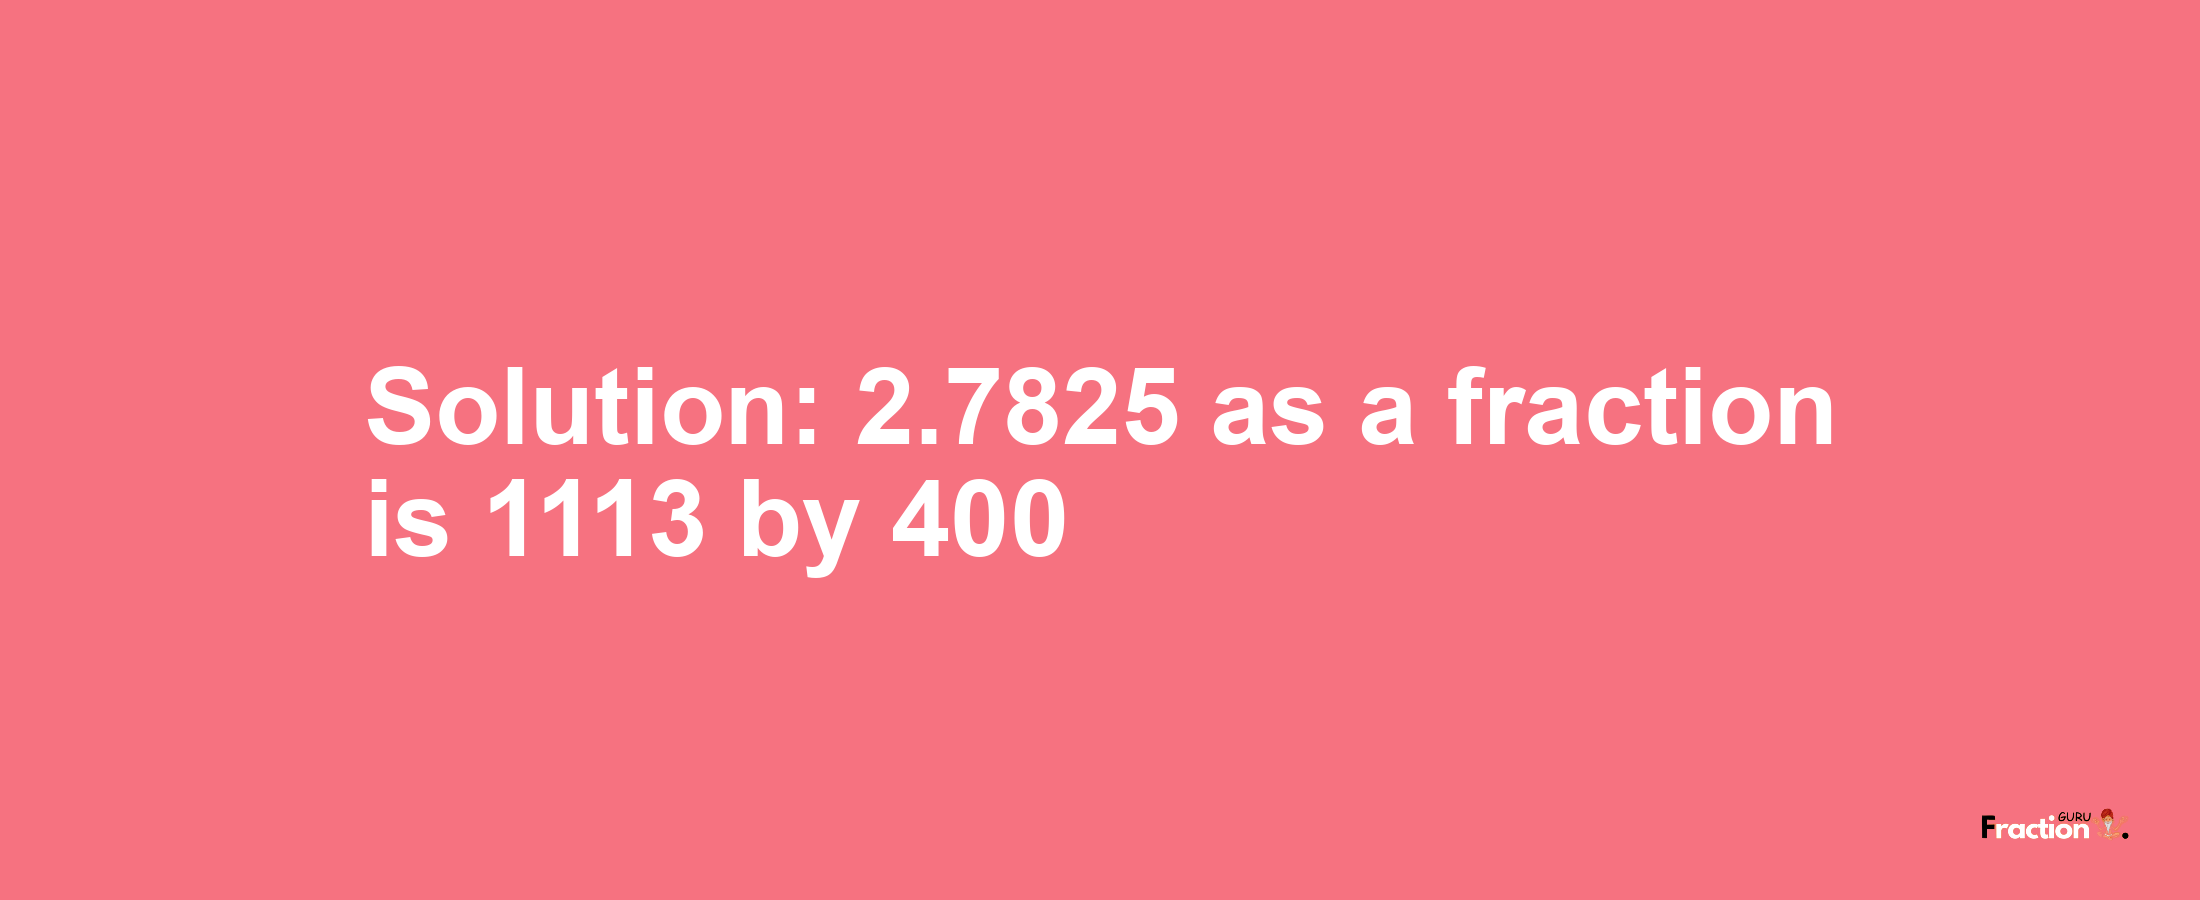 Solution:2.7825 as a fraction is 1113/400